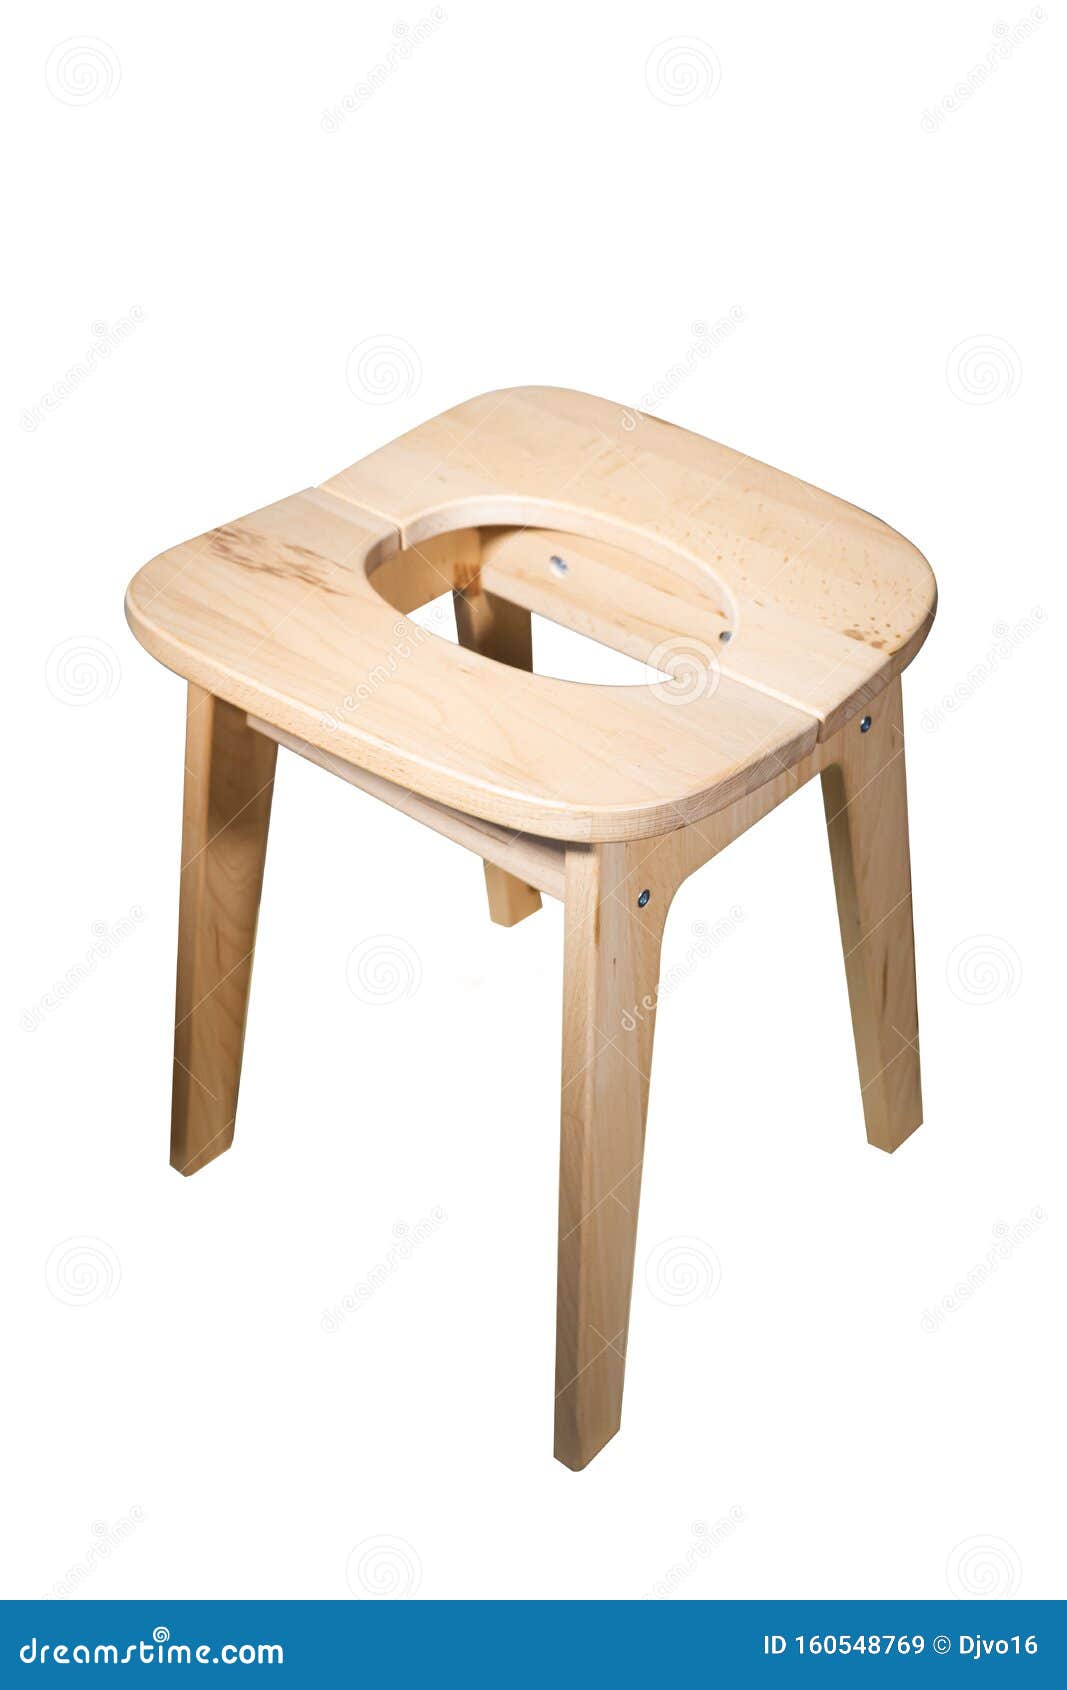 The Chair For The Procedure Of The Yoni Steam Stock Image